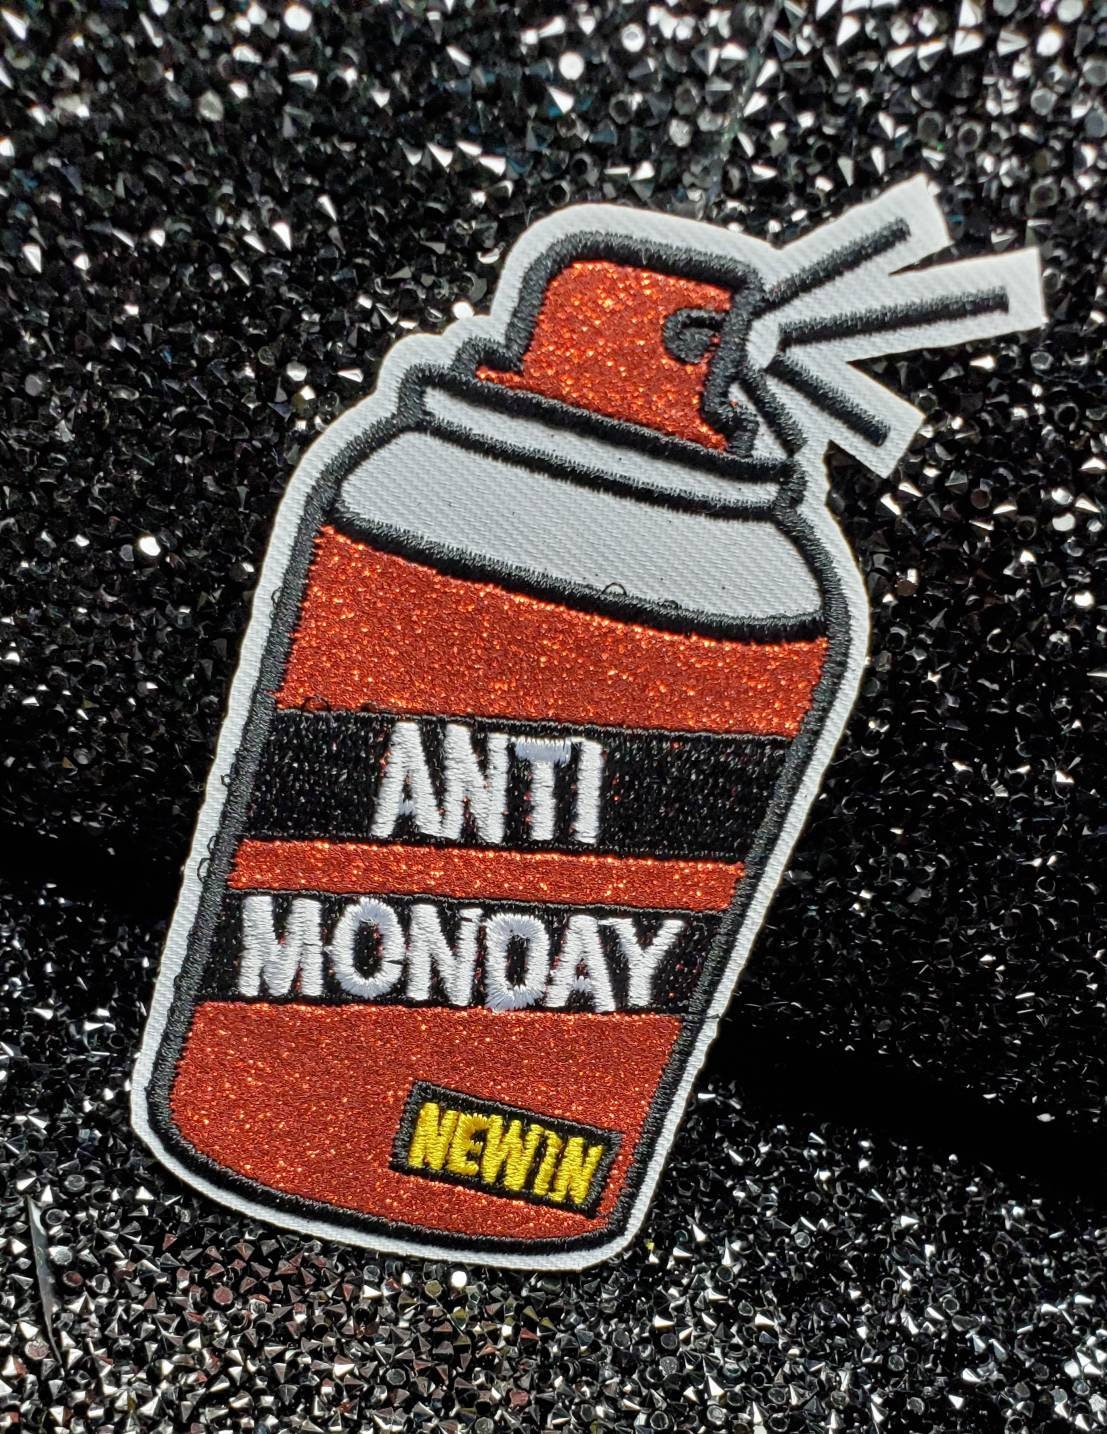 Cool 2pc/set, Red Metallic ANTI-MONDAY patches, DIY, Embroidered Applique Iron On Patch, Fun Patch for Denim Jacket, Hoodies, Glitter Patch